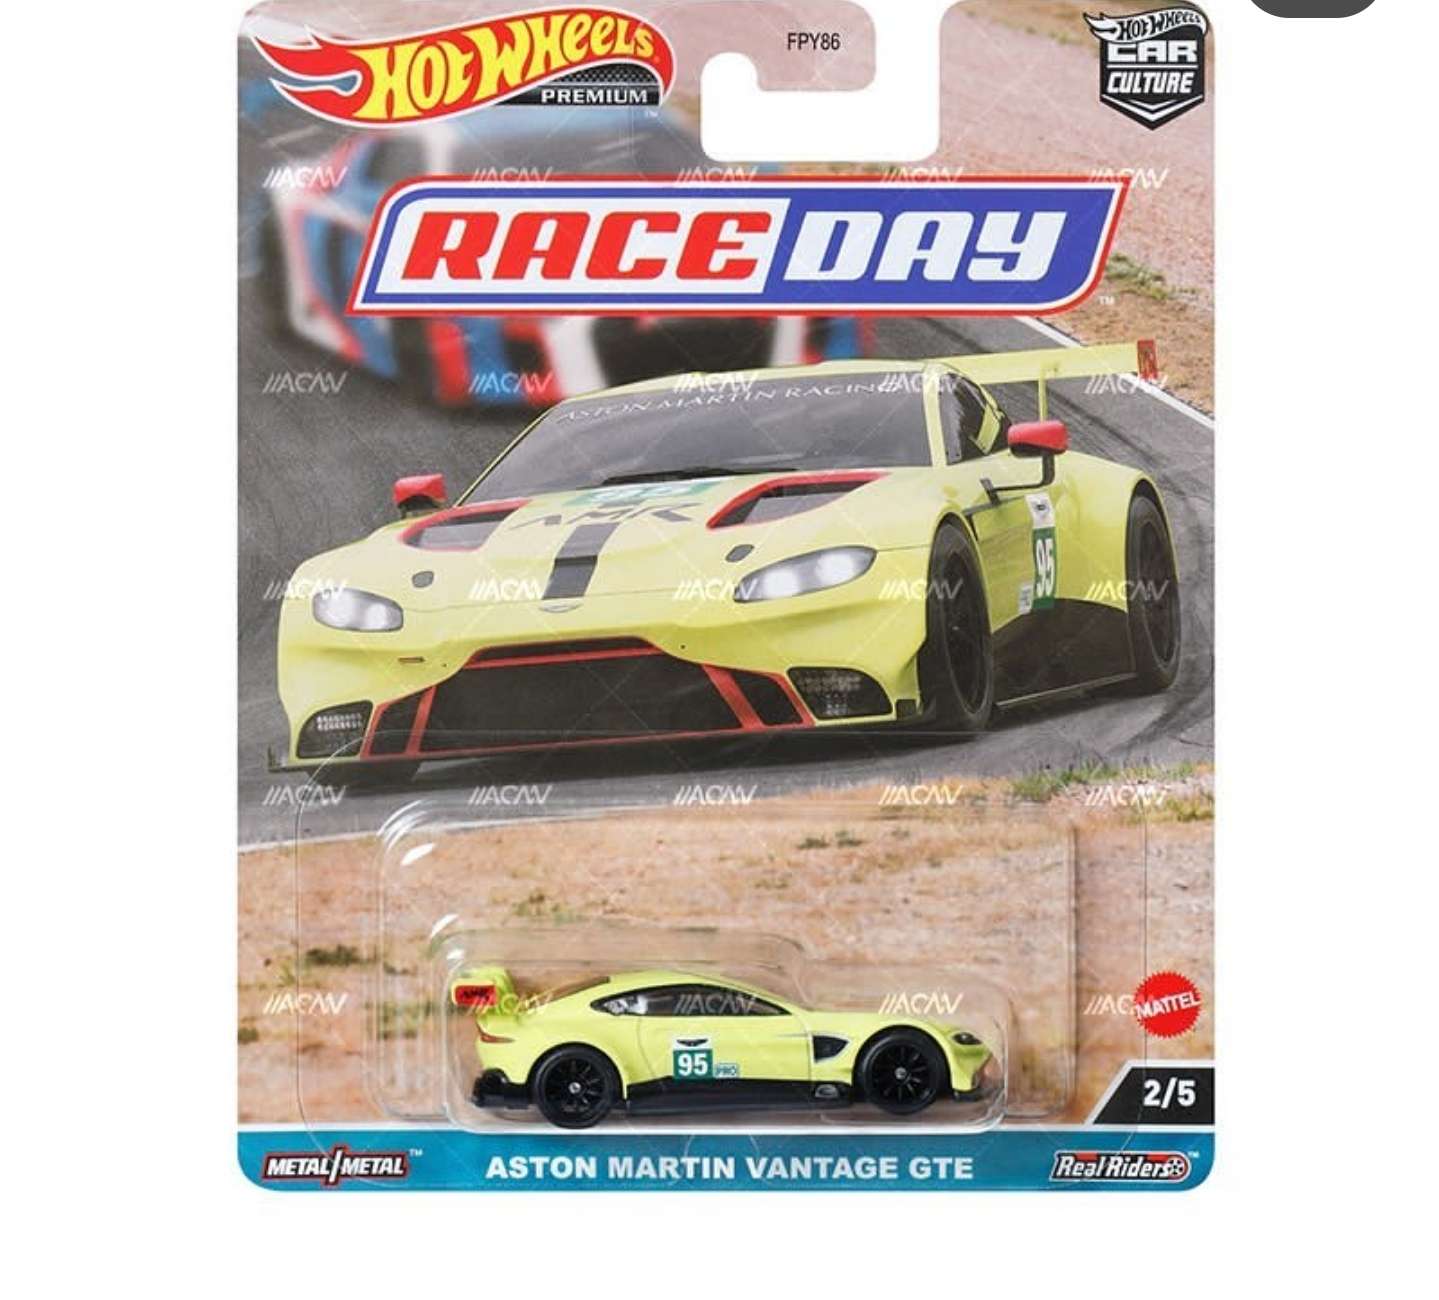 (Pre-order) 2023 Hot Wheels Car Culture Race Day Case of 10